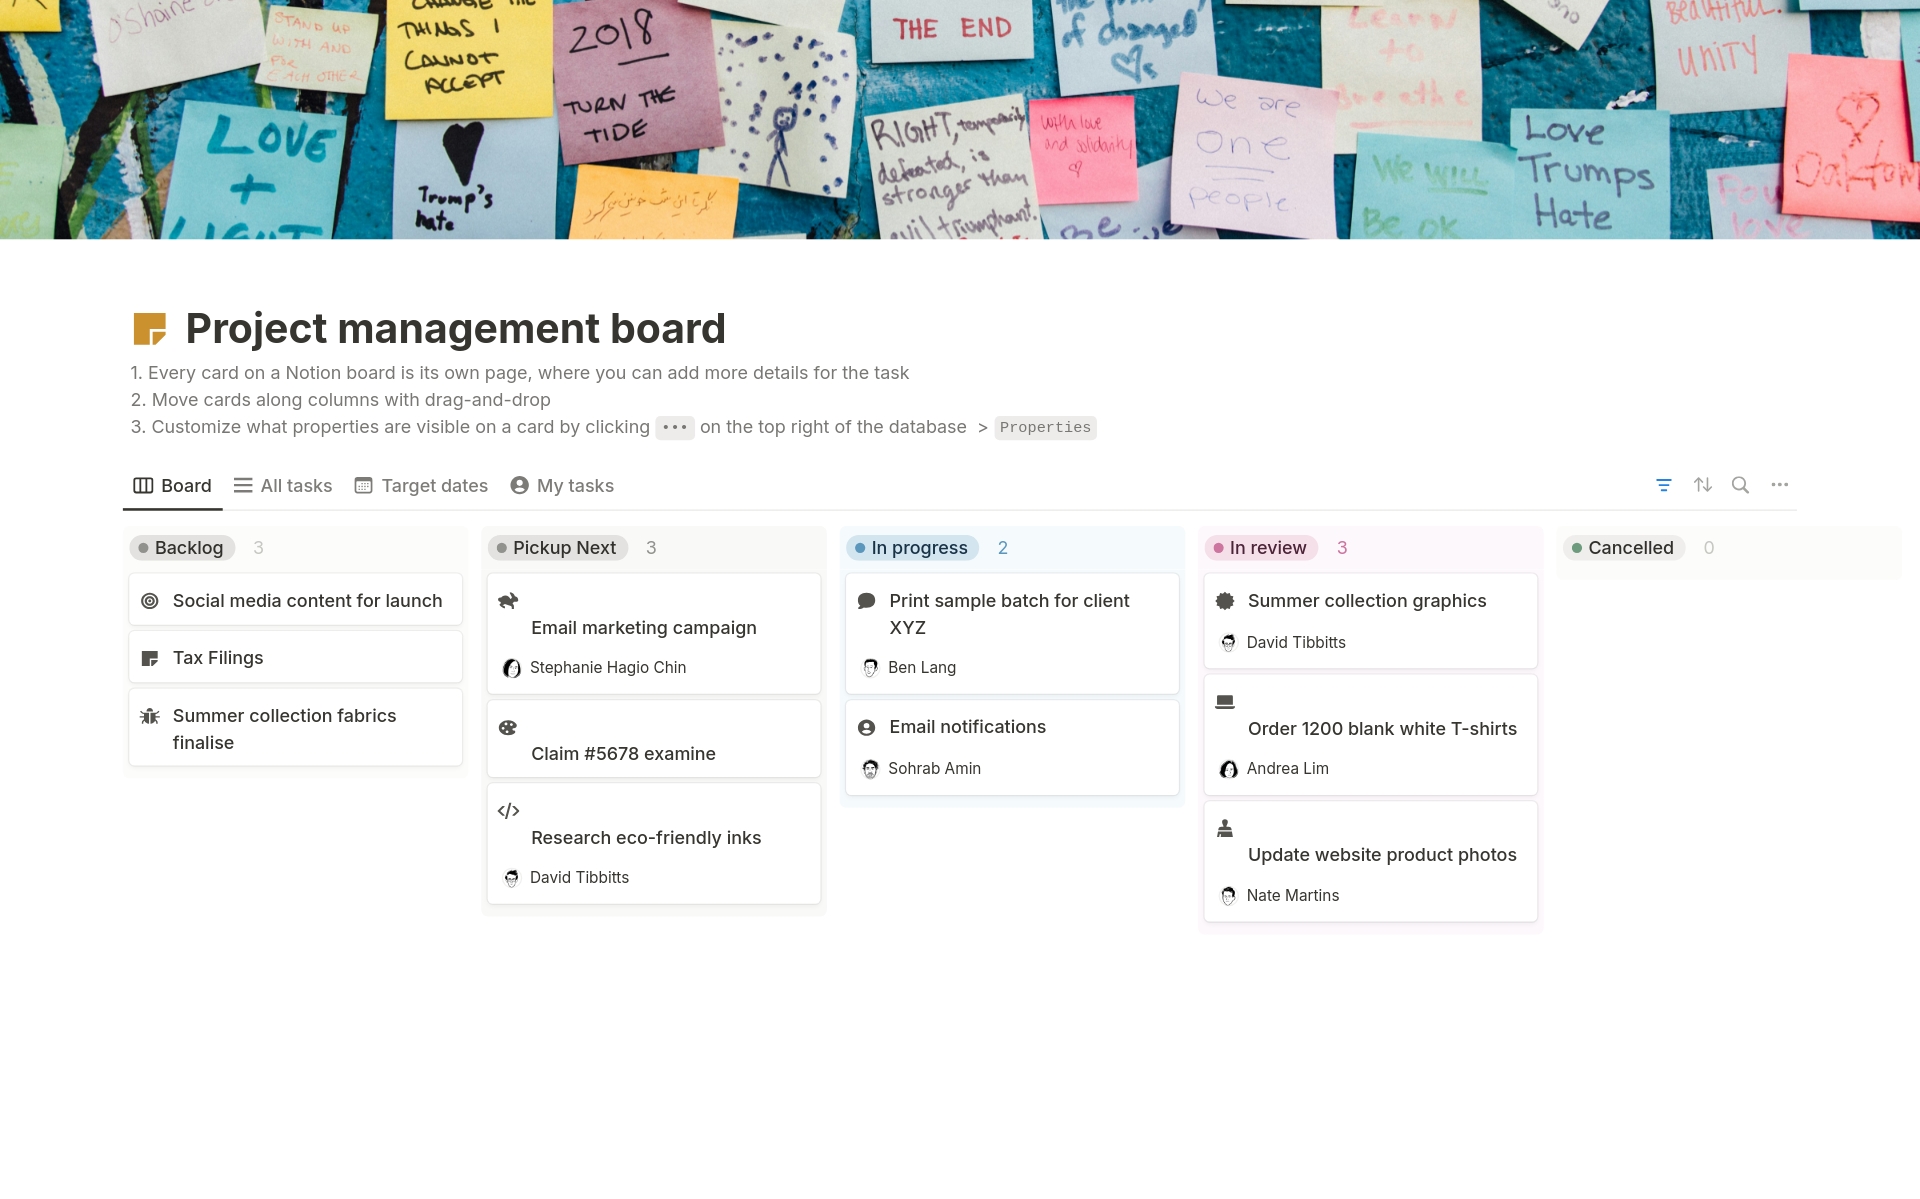 Enhance your project oversight with versatile Kanban board, table, and calendar views to manage tasks effectively. Streamline your workflow by defining roles—Responsible, Accountable, Consulted, Informed—within each task, ensuring clarity and accountability across your team.